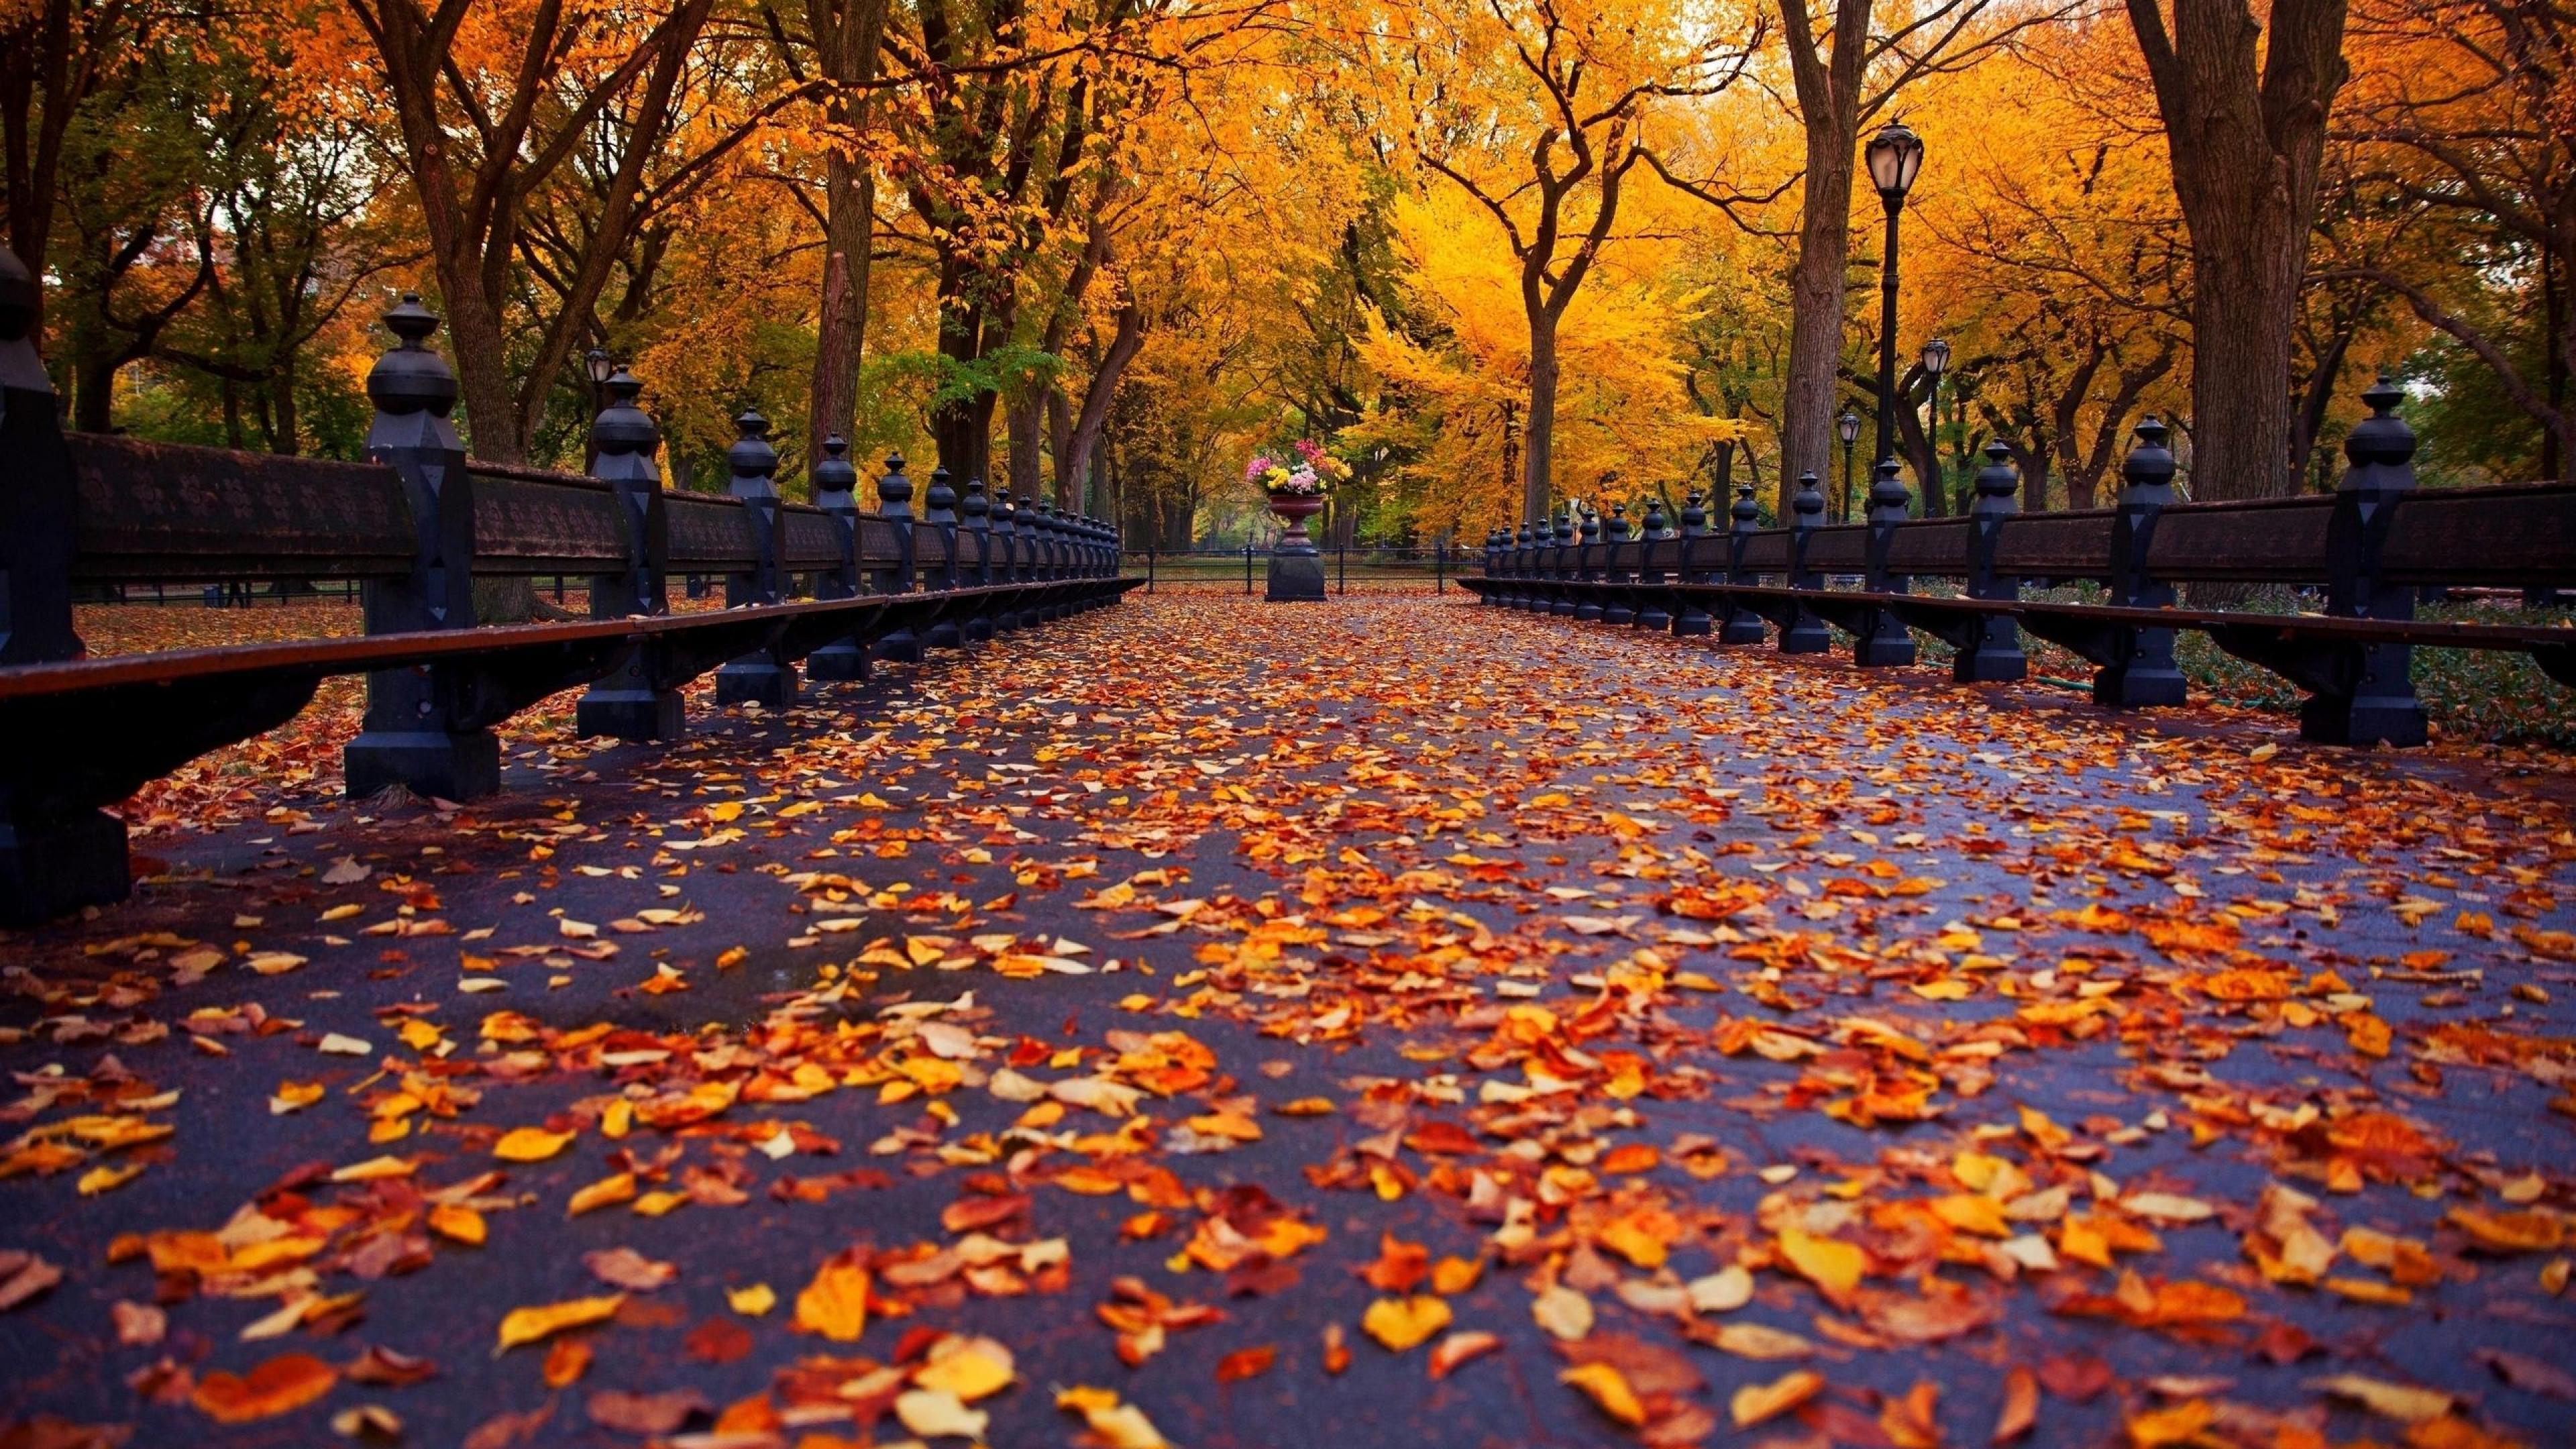 A walkway in Central Park covered in fallen leaves - Vintage fall